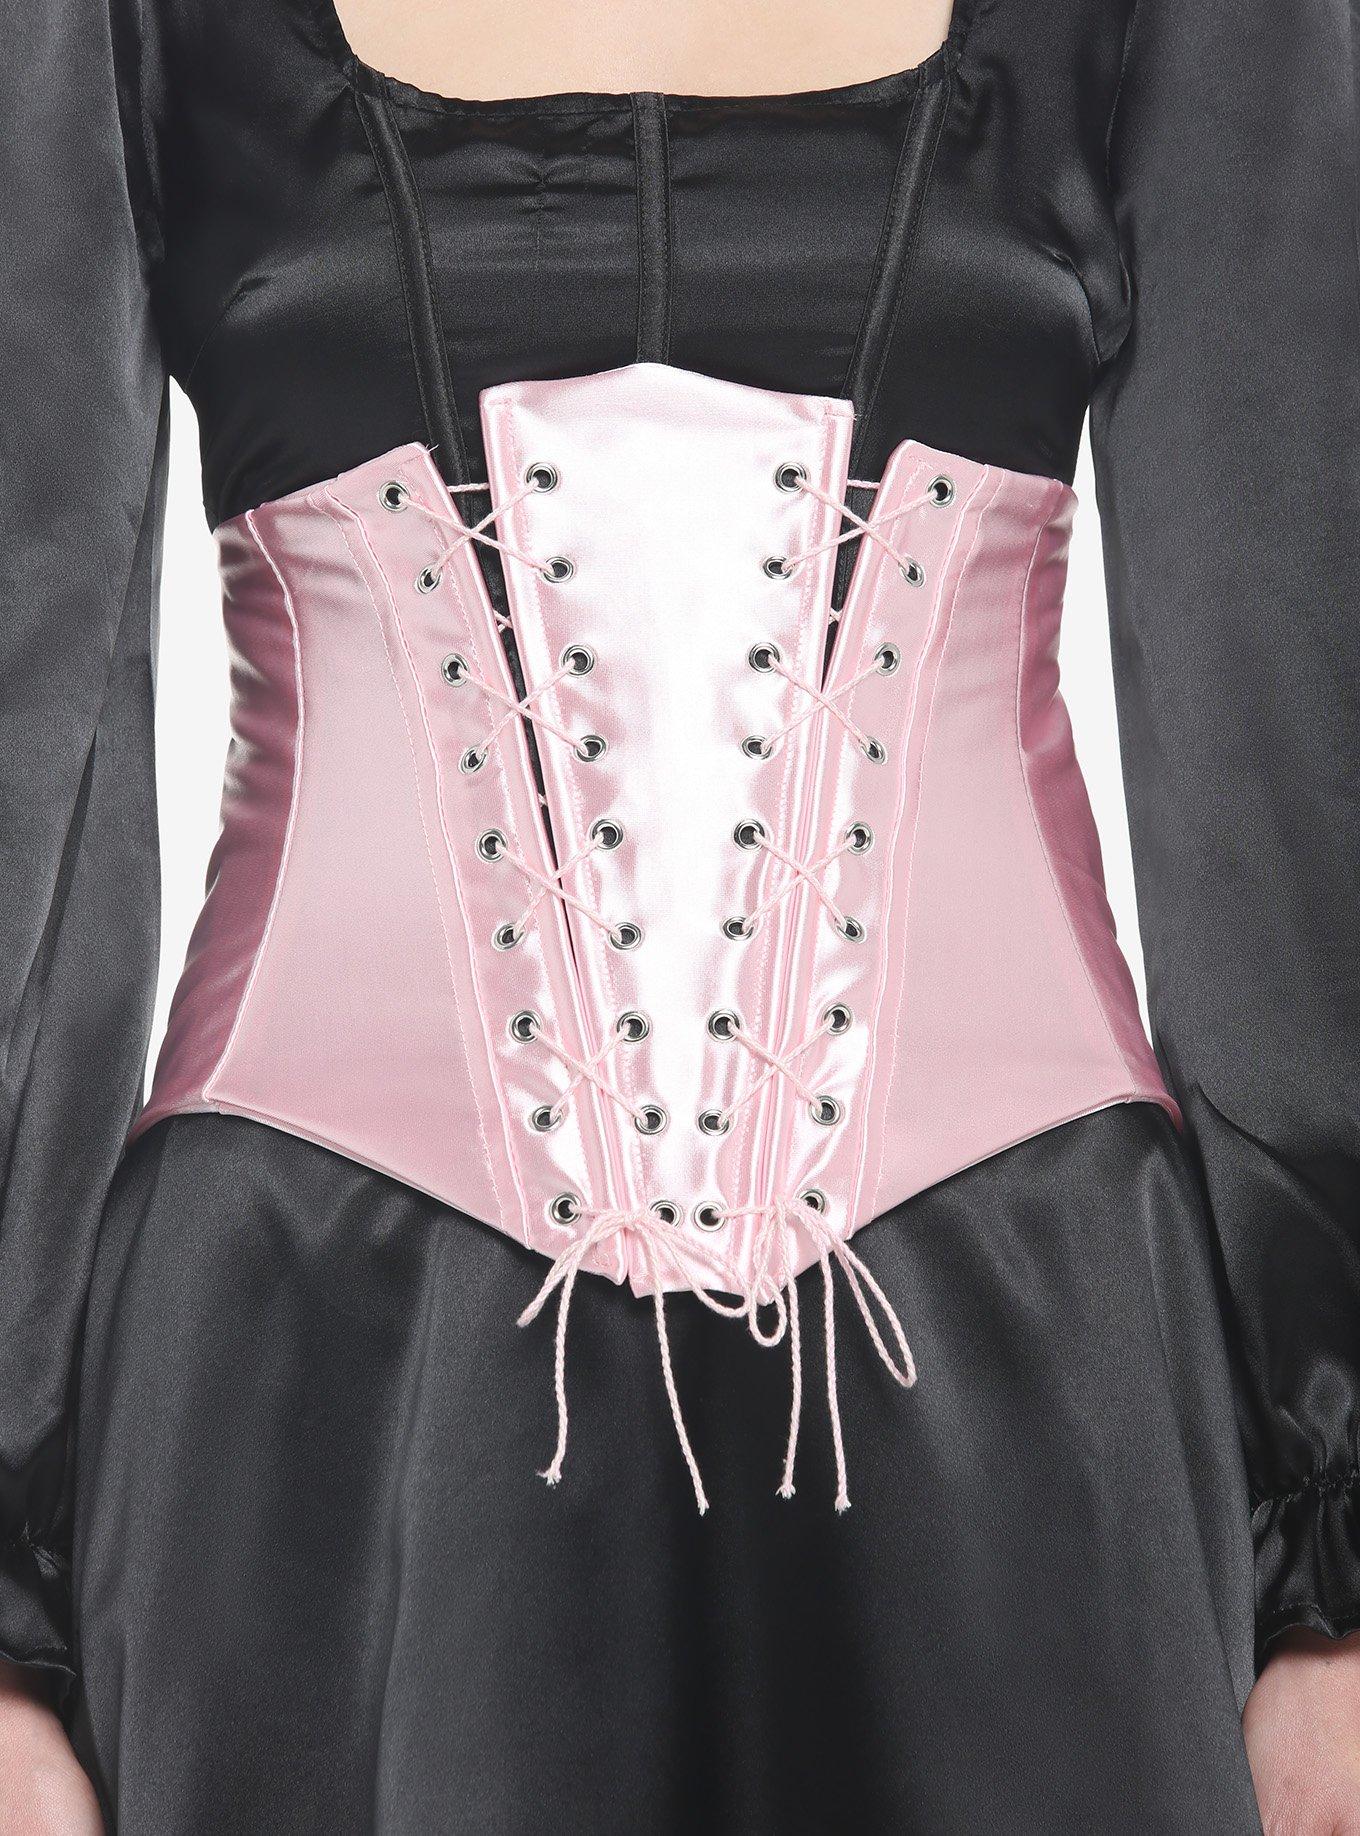 Hot Topic Pink Satin Black Lace Underbust Corset Harness